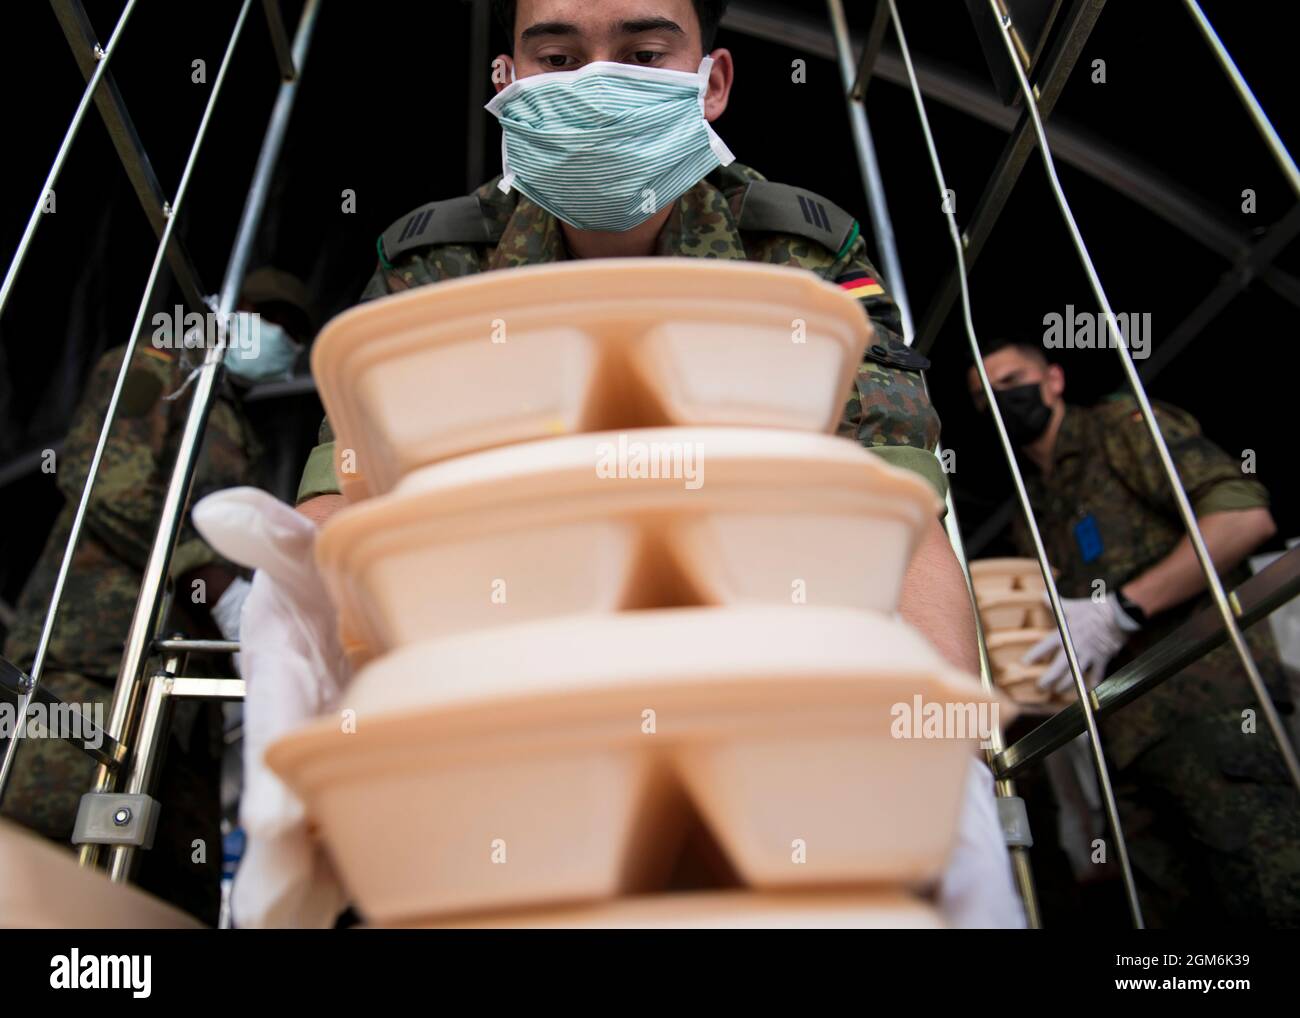 A German Bundeswehr soldier loads meals onto a cart during Operation Allies Refuge at Ramstein Air Base, Germany, Sept. 10, 2021. Soldiers from the German Bundeswehr worked shoulder to shoulder with U.S. Army and Air Force service members to prepare meals for the Afghanistan evacuees. Ramstein Air Base is a transit center that provides a safe place for the evacuees to complete their paperwork while security and background checks are conducted before they continue on to their final destination. (U.S. Army photo by Staff Sgt. Thomas Mort) Stock Photo